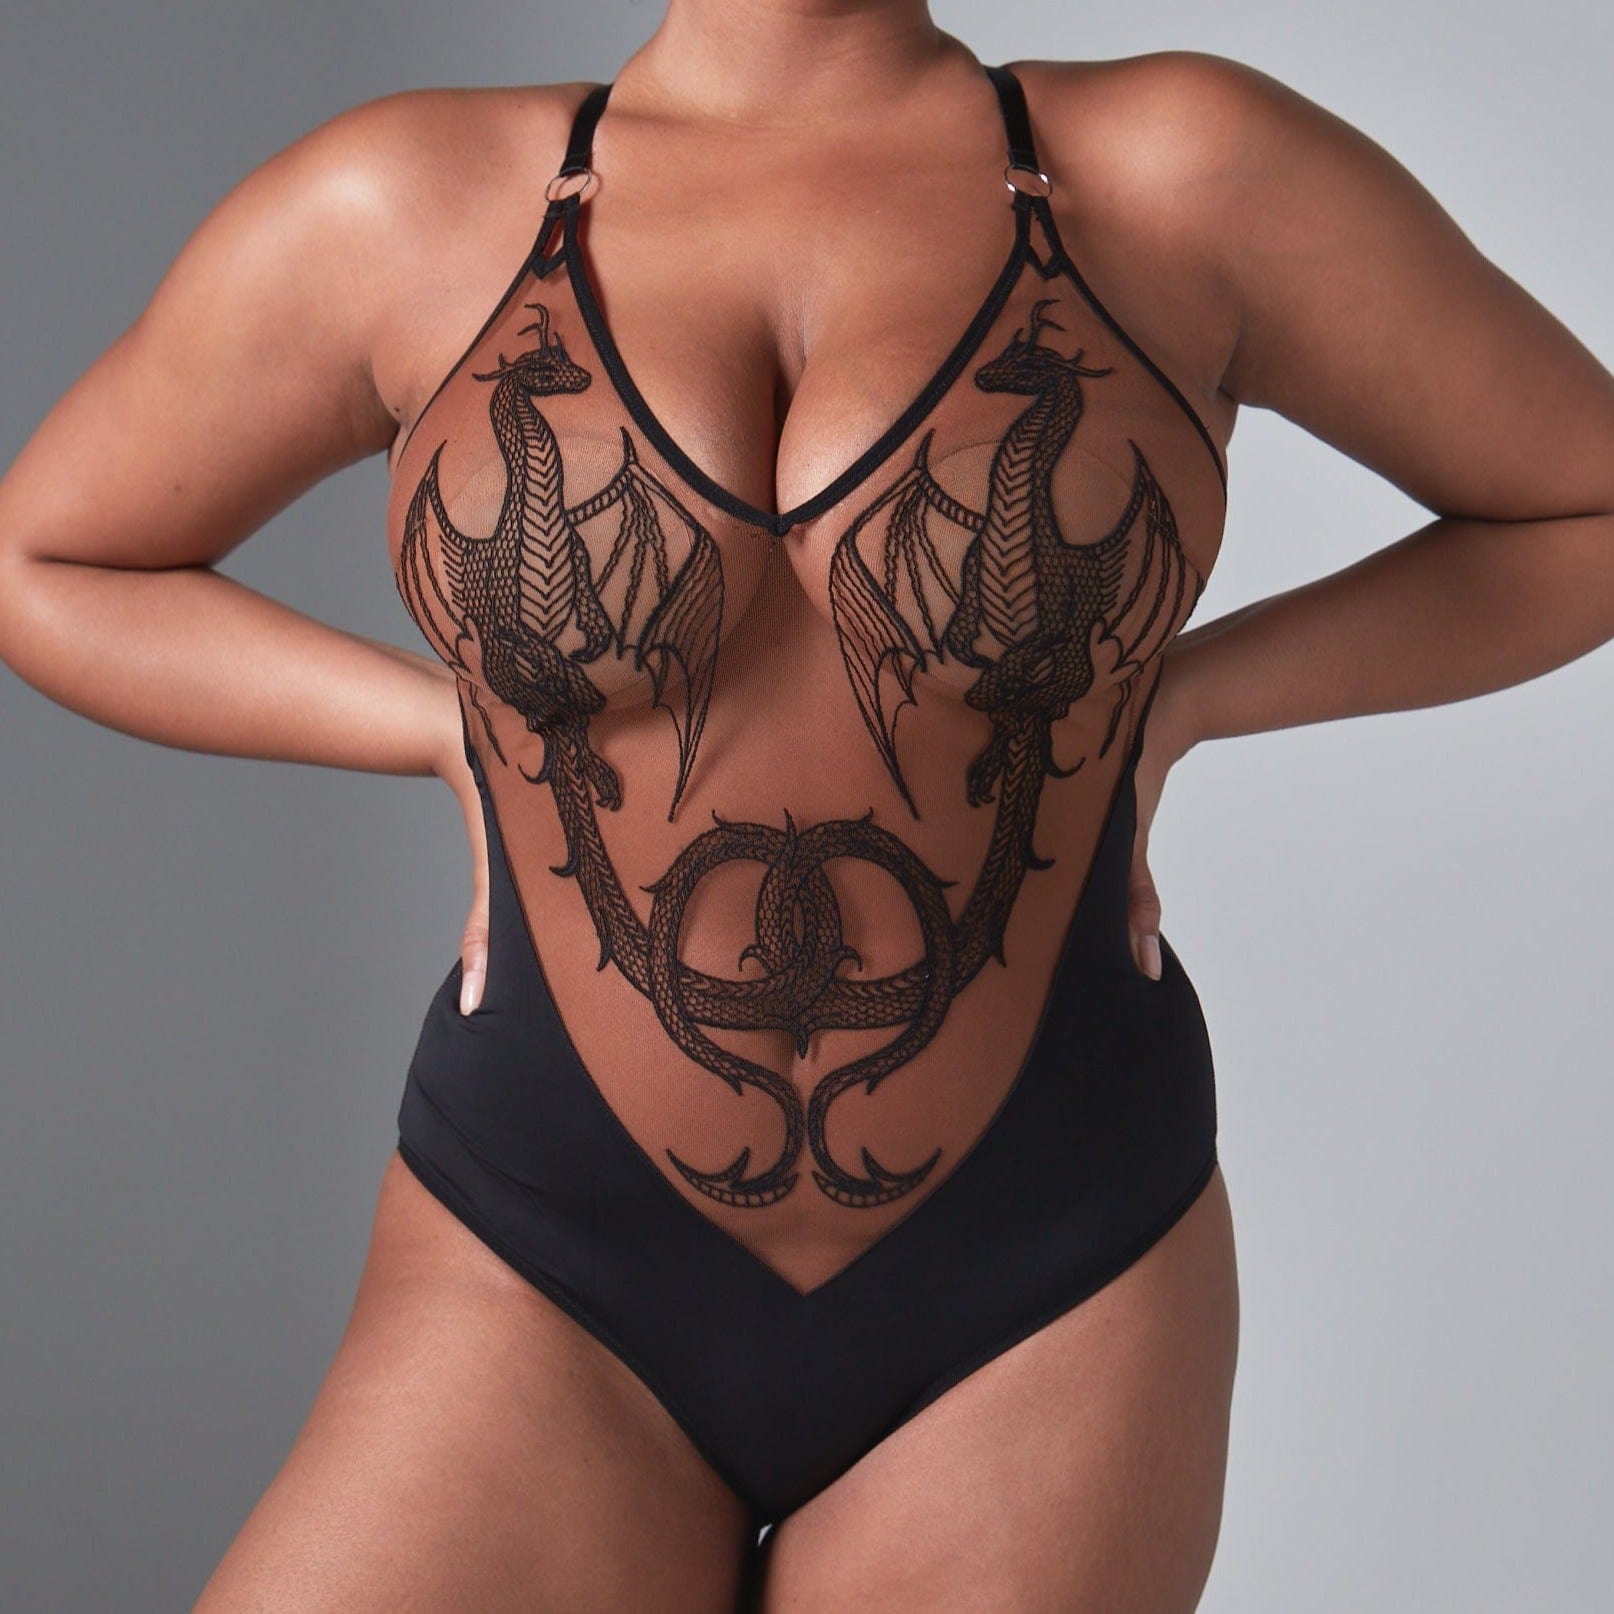 Dracona Bodysuit - Available in 2 Nudes